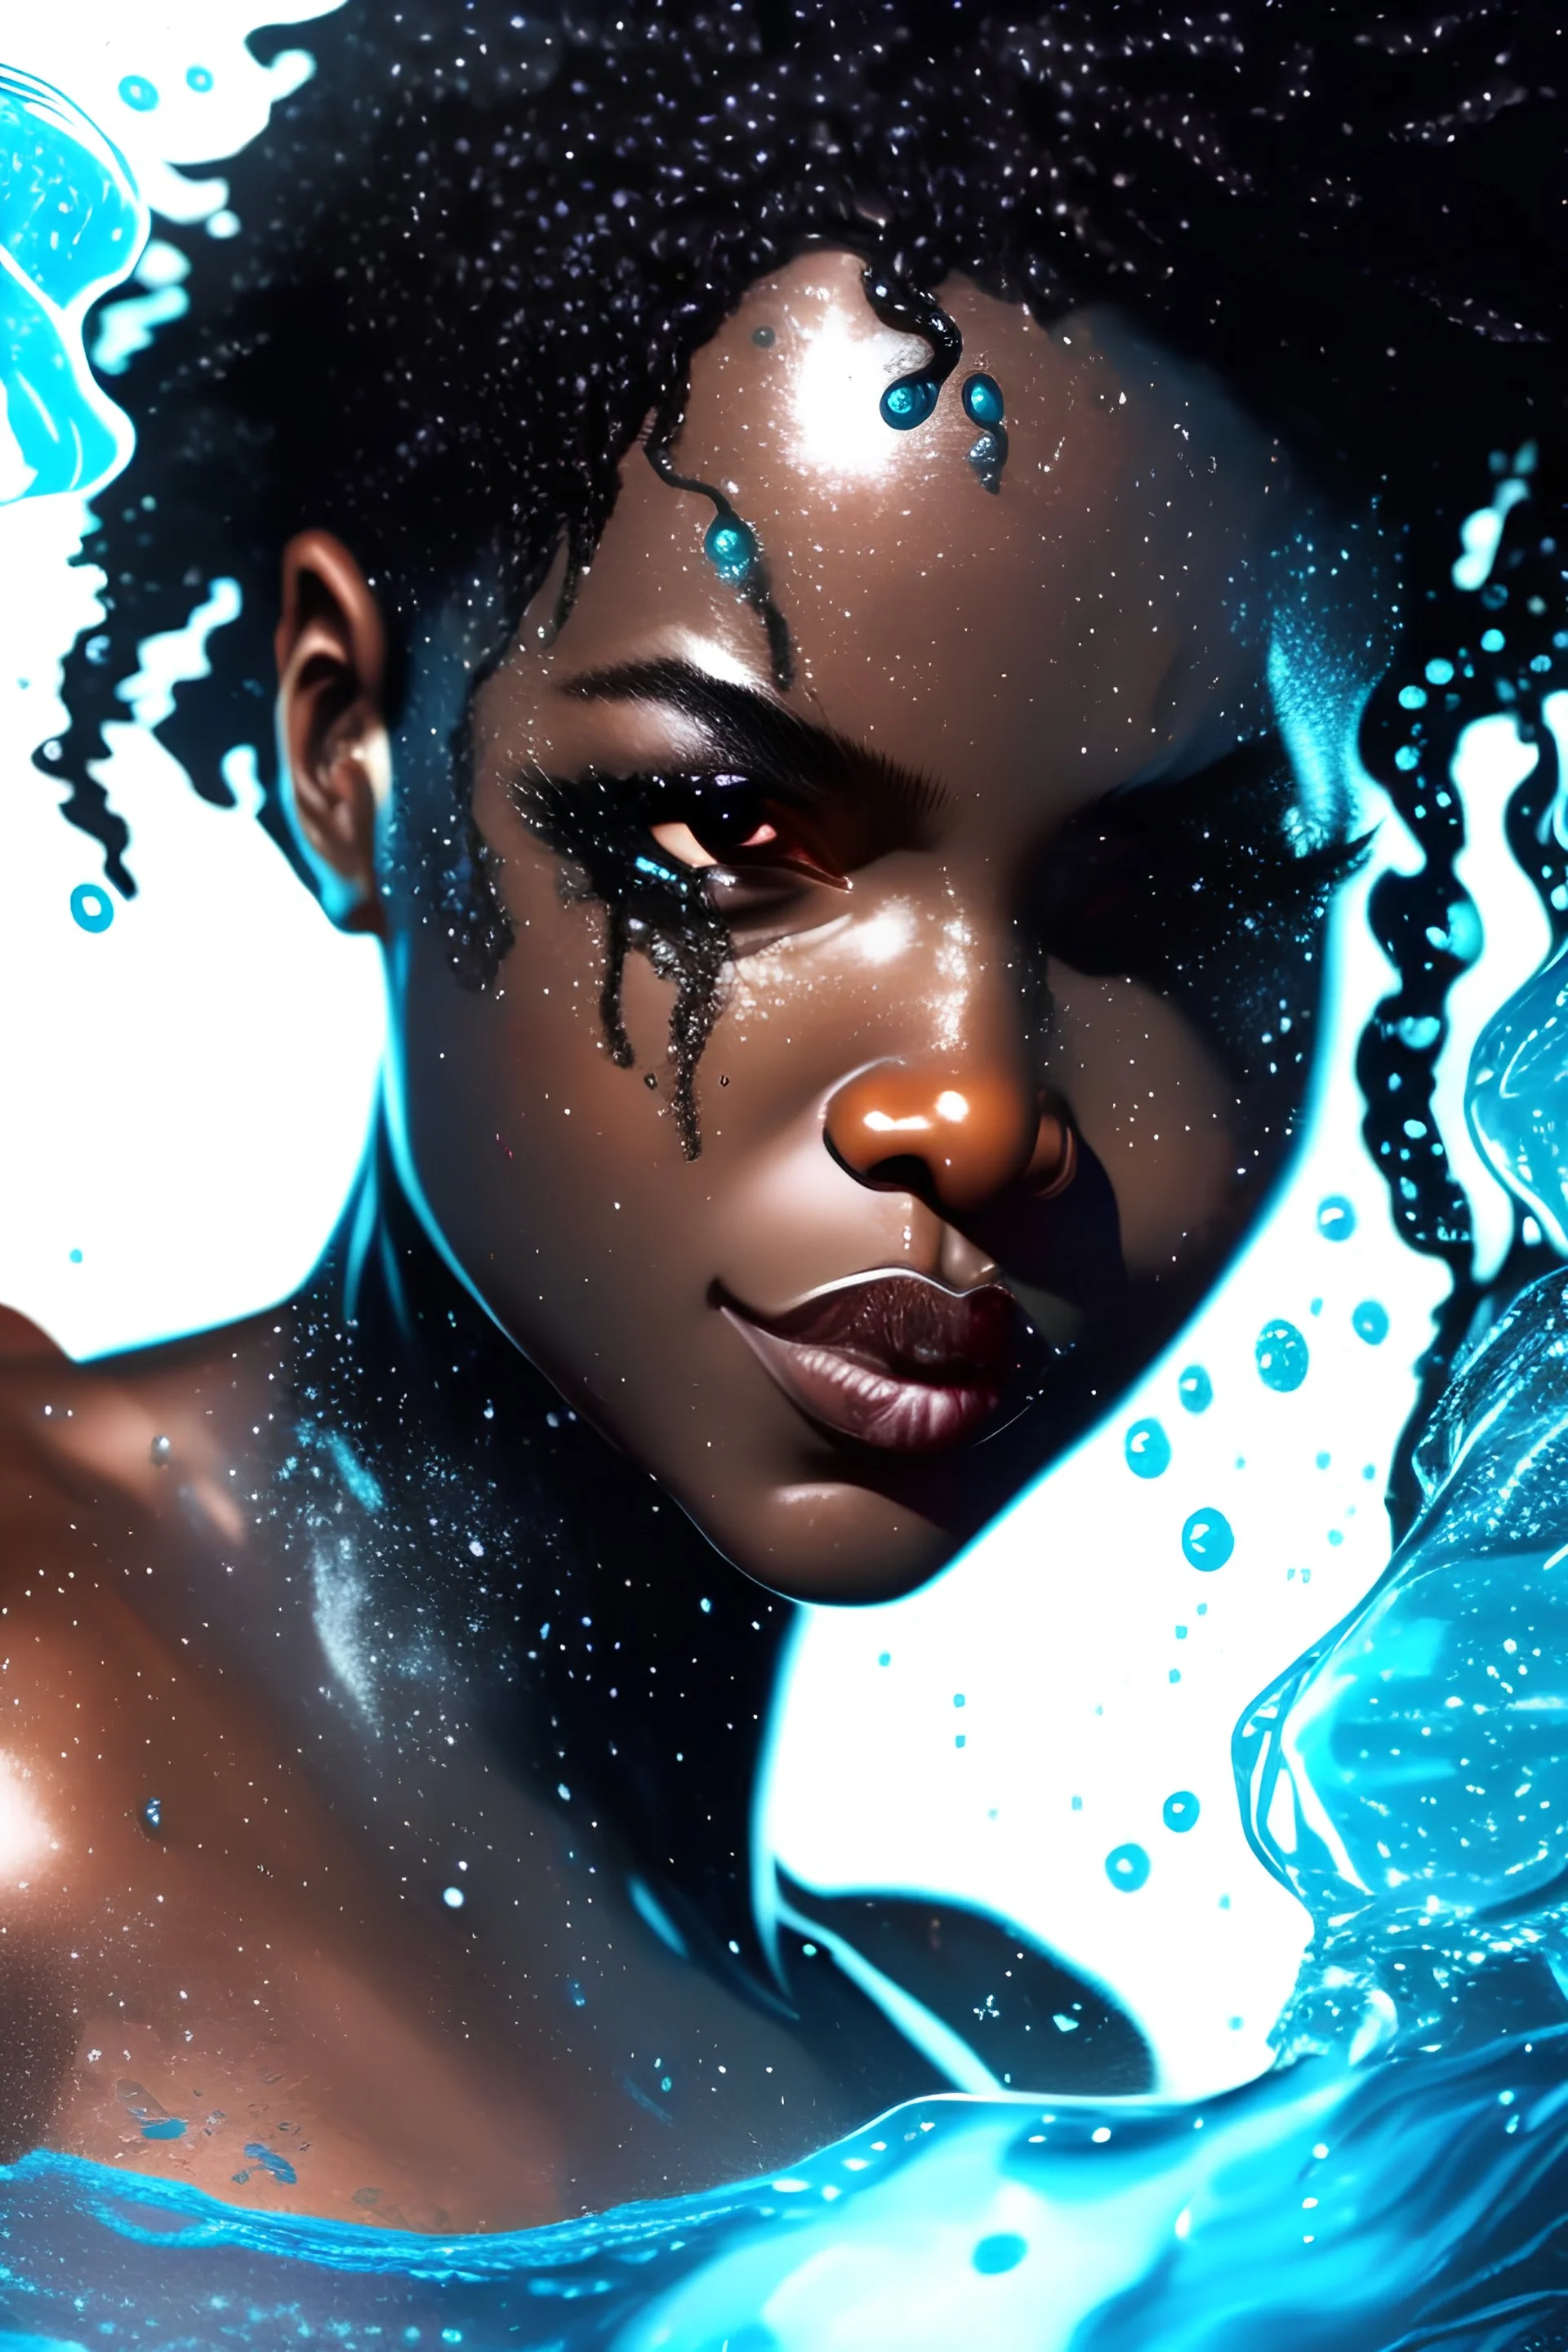 A black female superhero with water powers close up